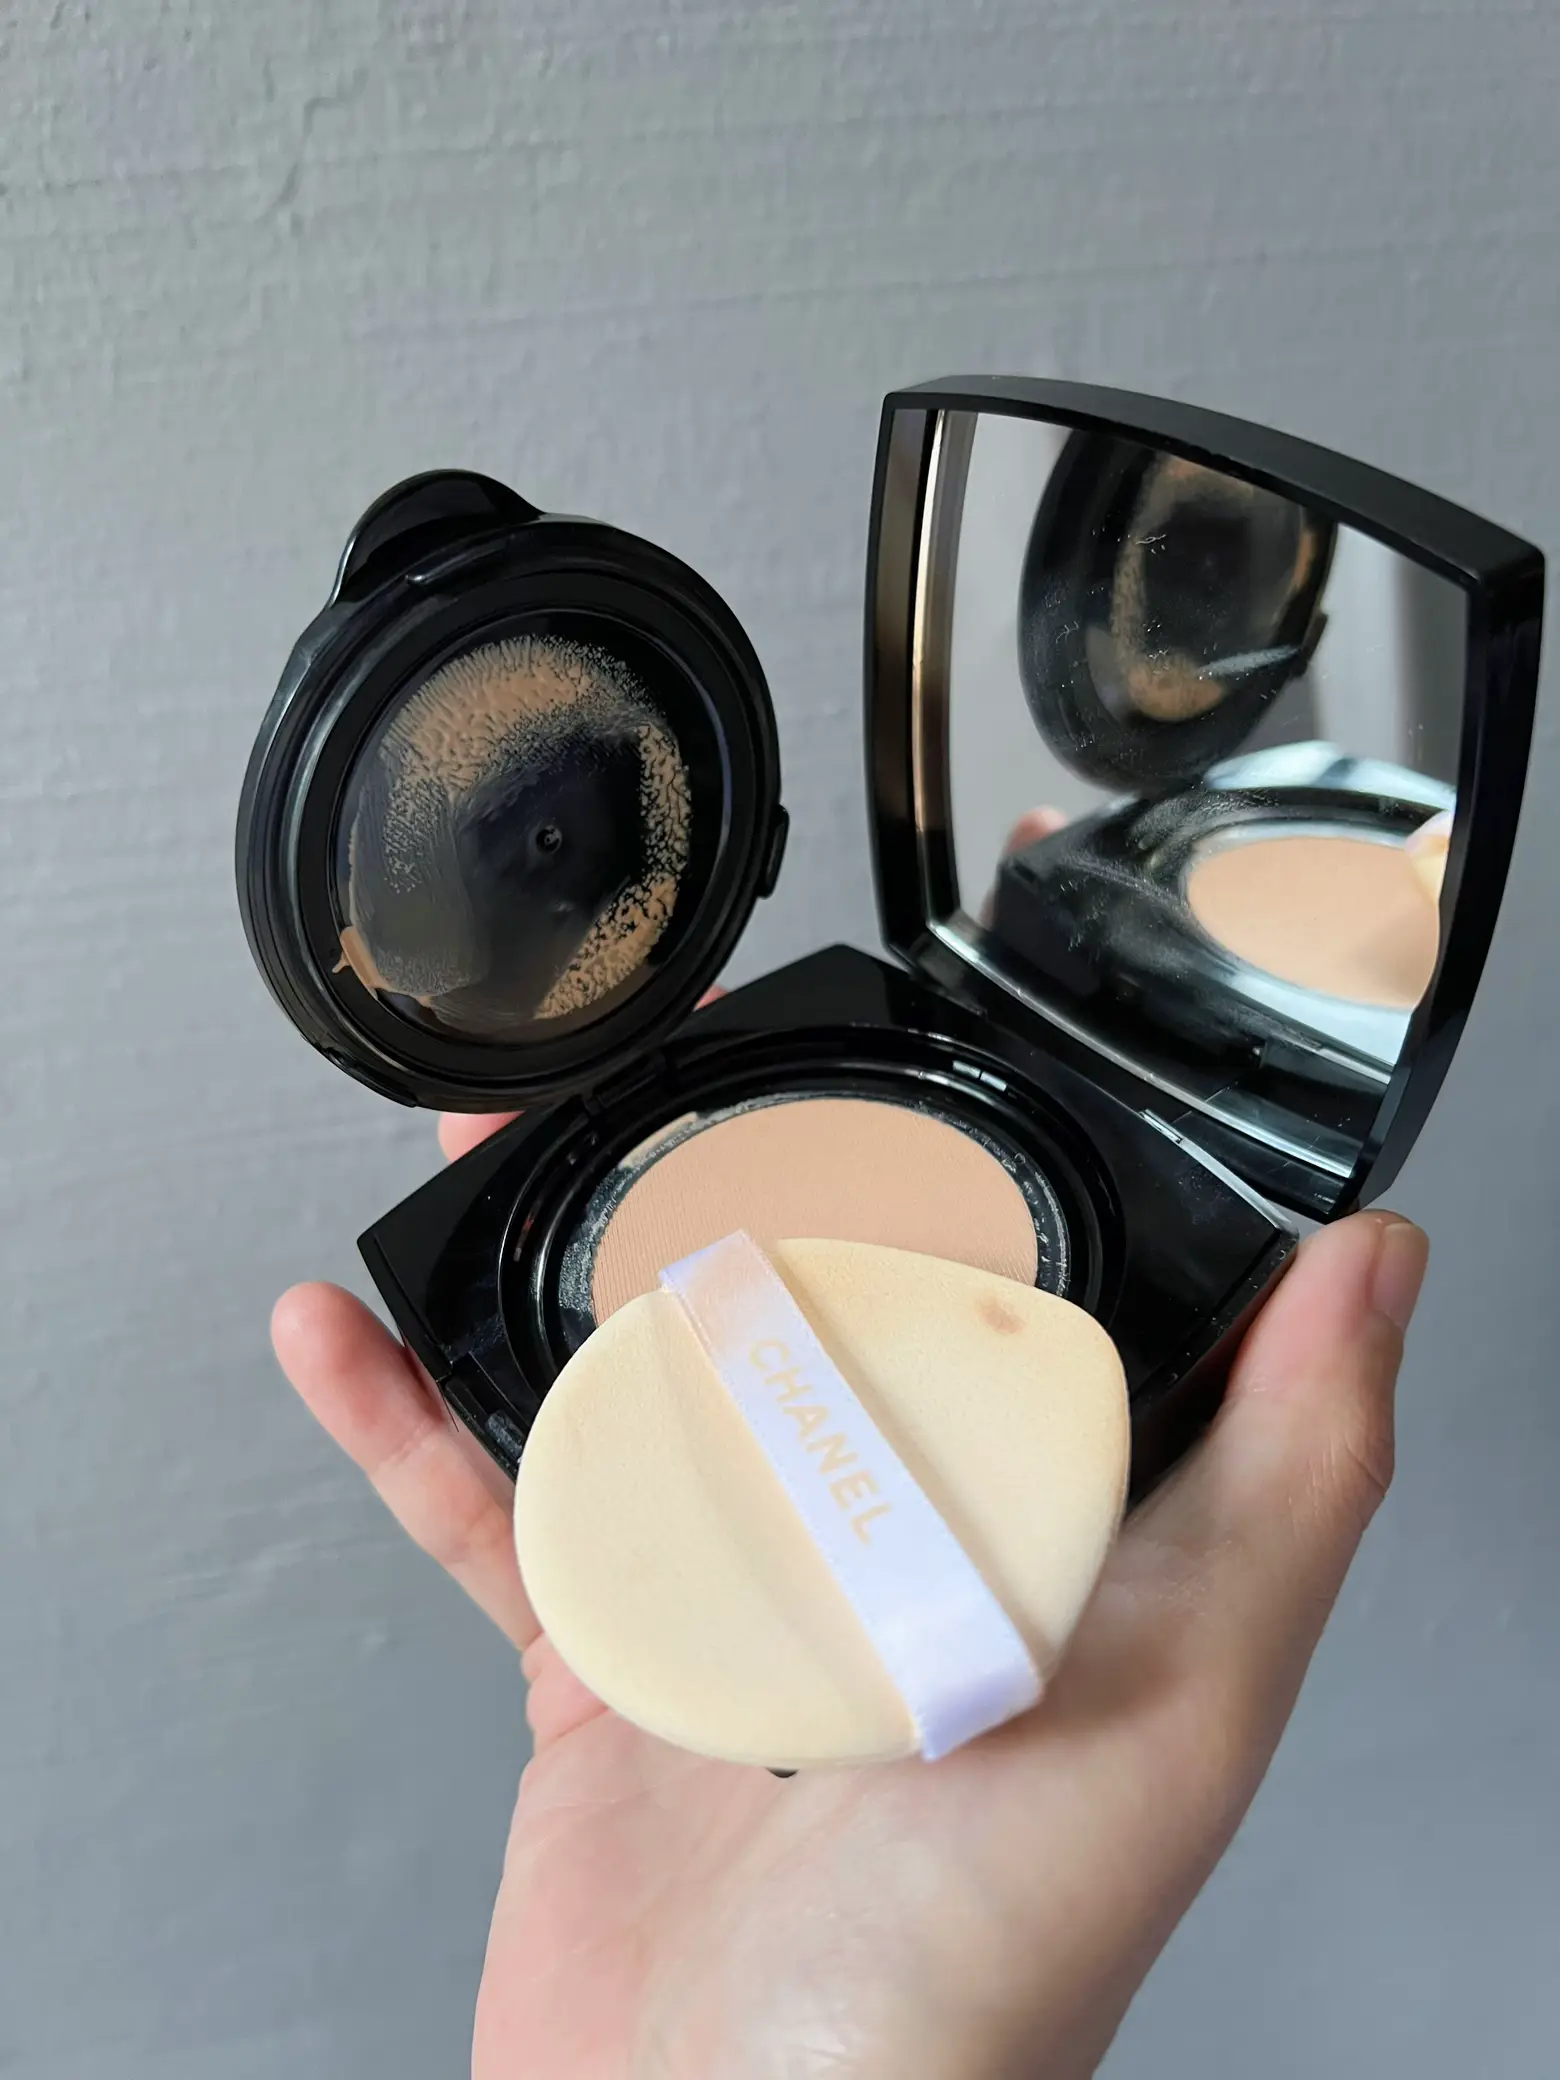 I tried the Chanel cushion foundation but…